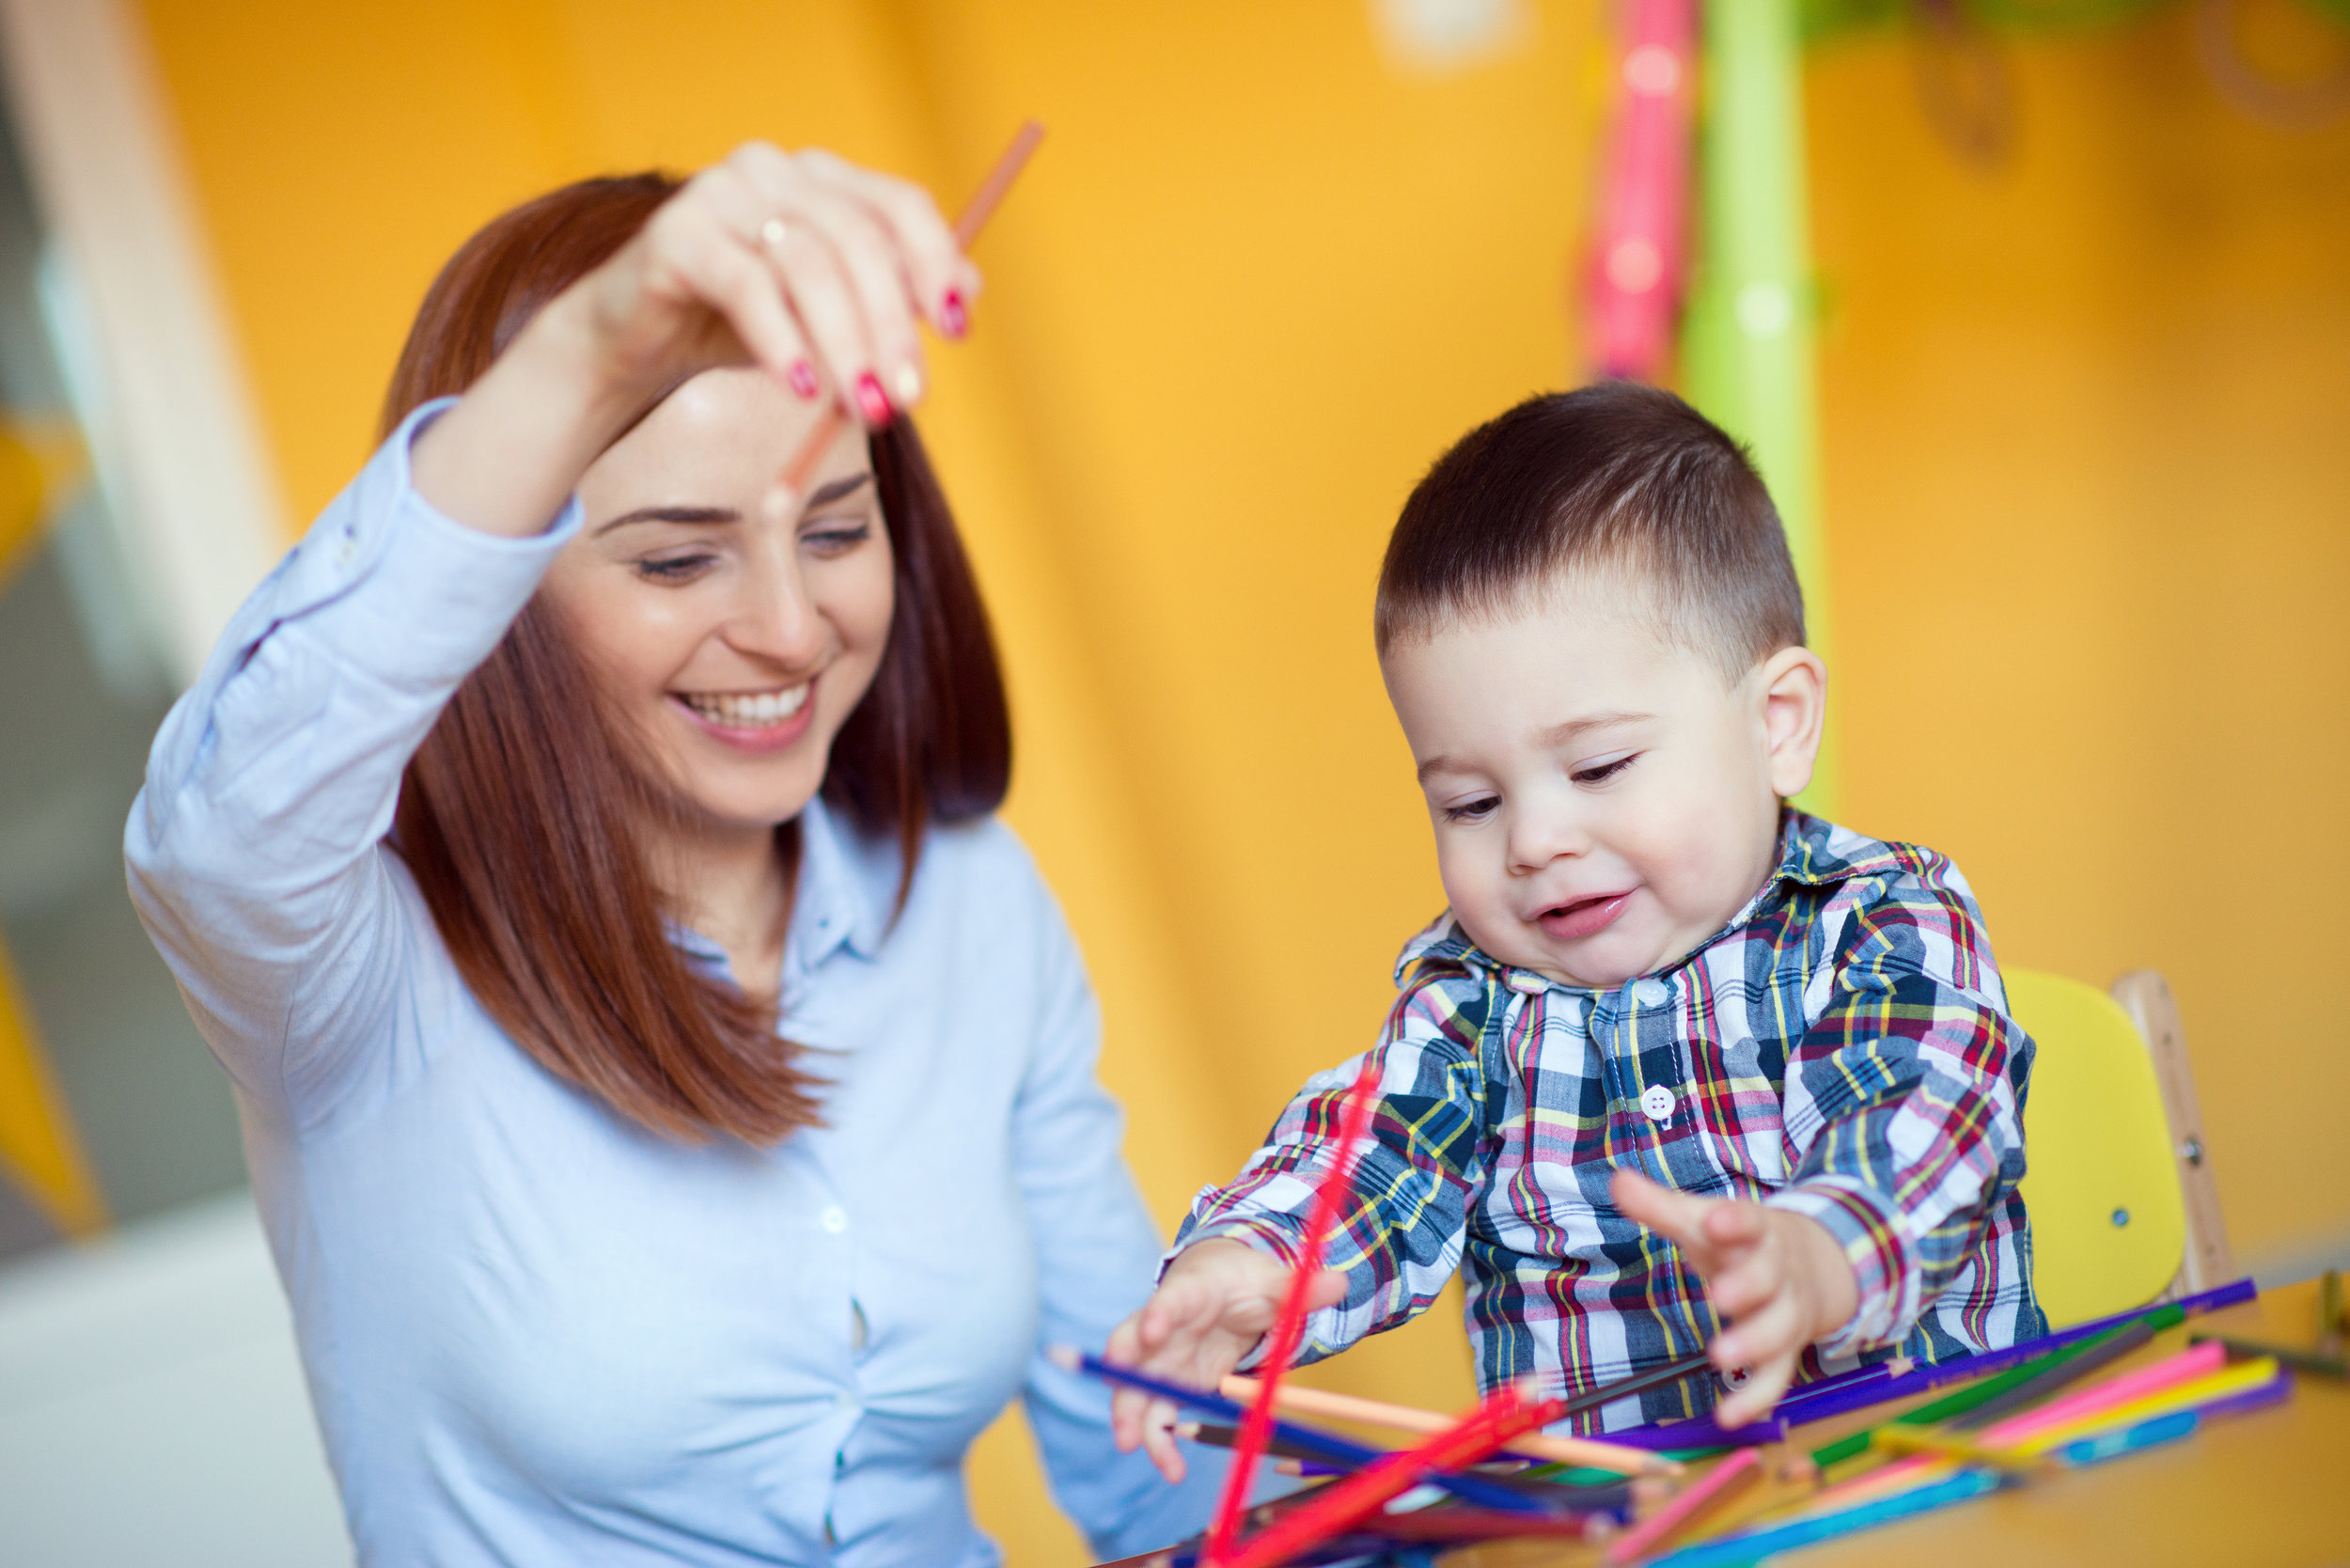   Early Intervention   Therapeutic services for children up to 3 years of age 